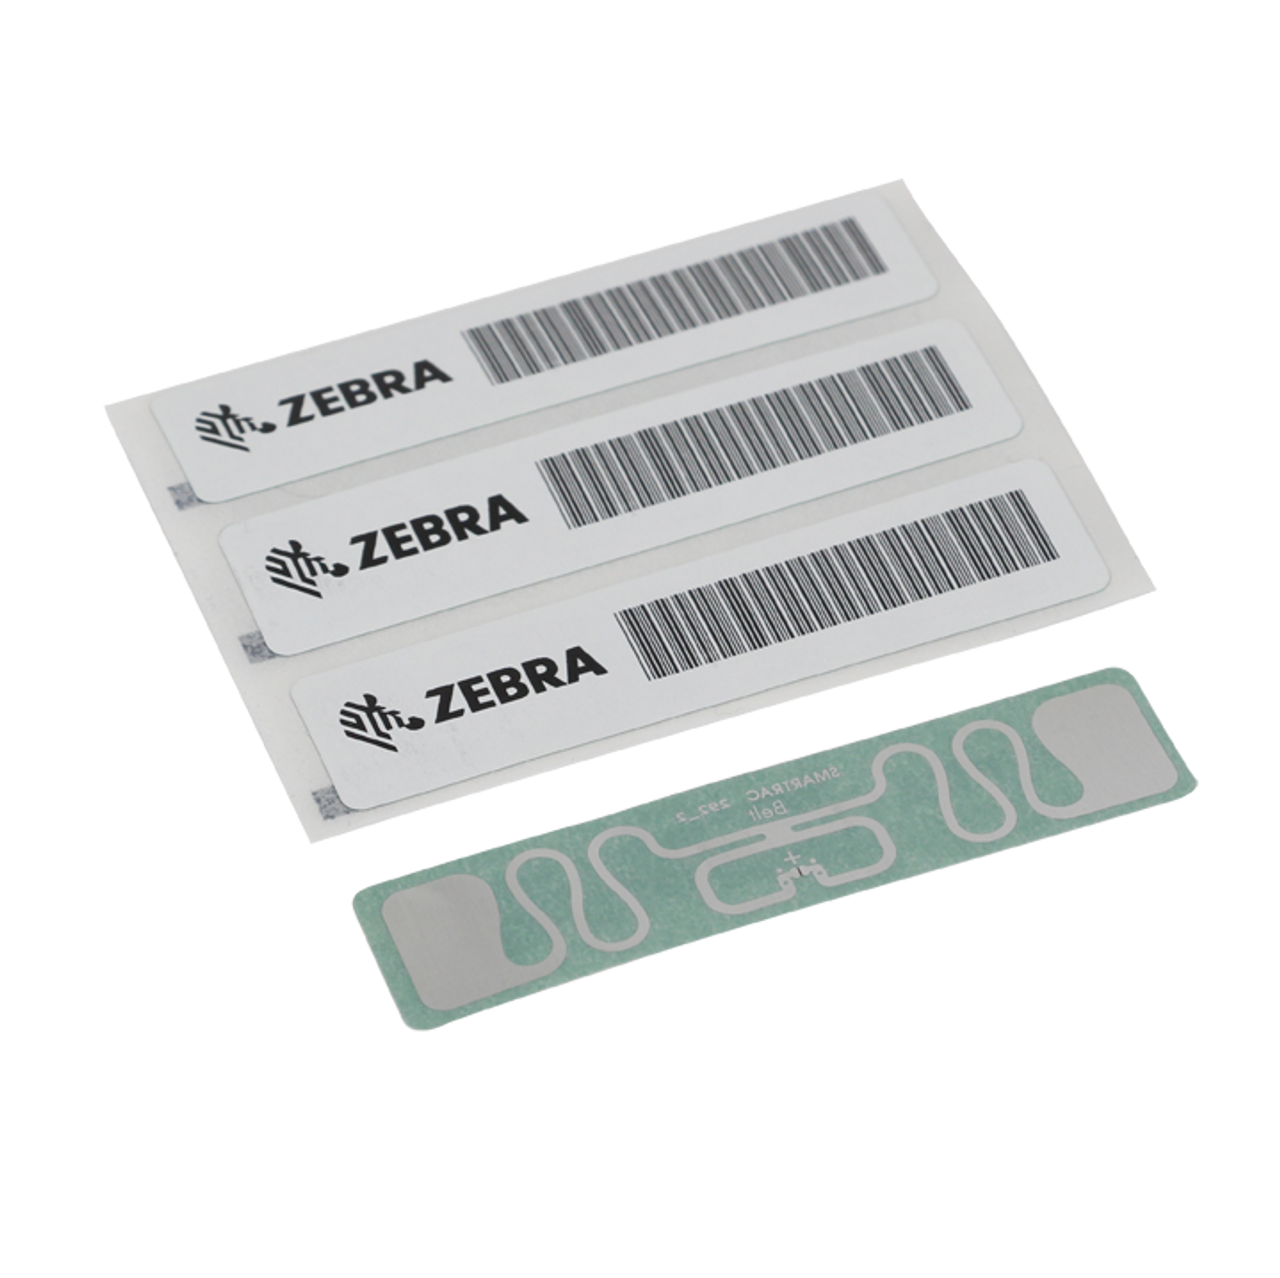 Zebra General Purpose RFID Label, Paper, 4x2in, DT, Z-Perform 2000D, Value  Coated, All-Temp Adhesive, 2000 Lbls/Roll, Roll/Carton Zebra Barcode   Mobility